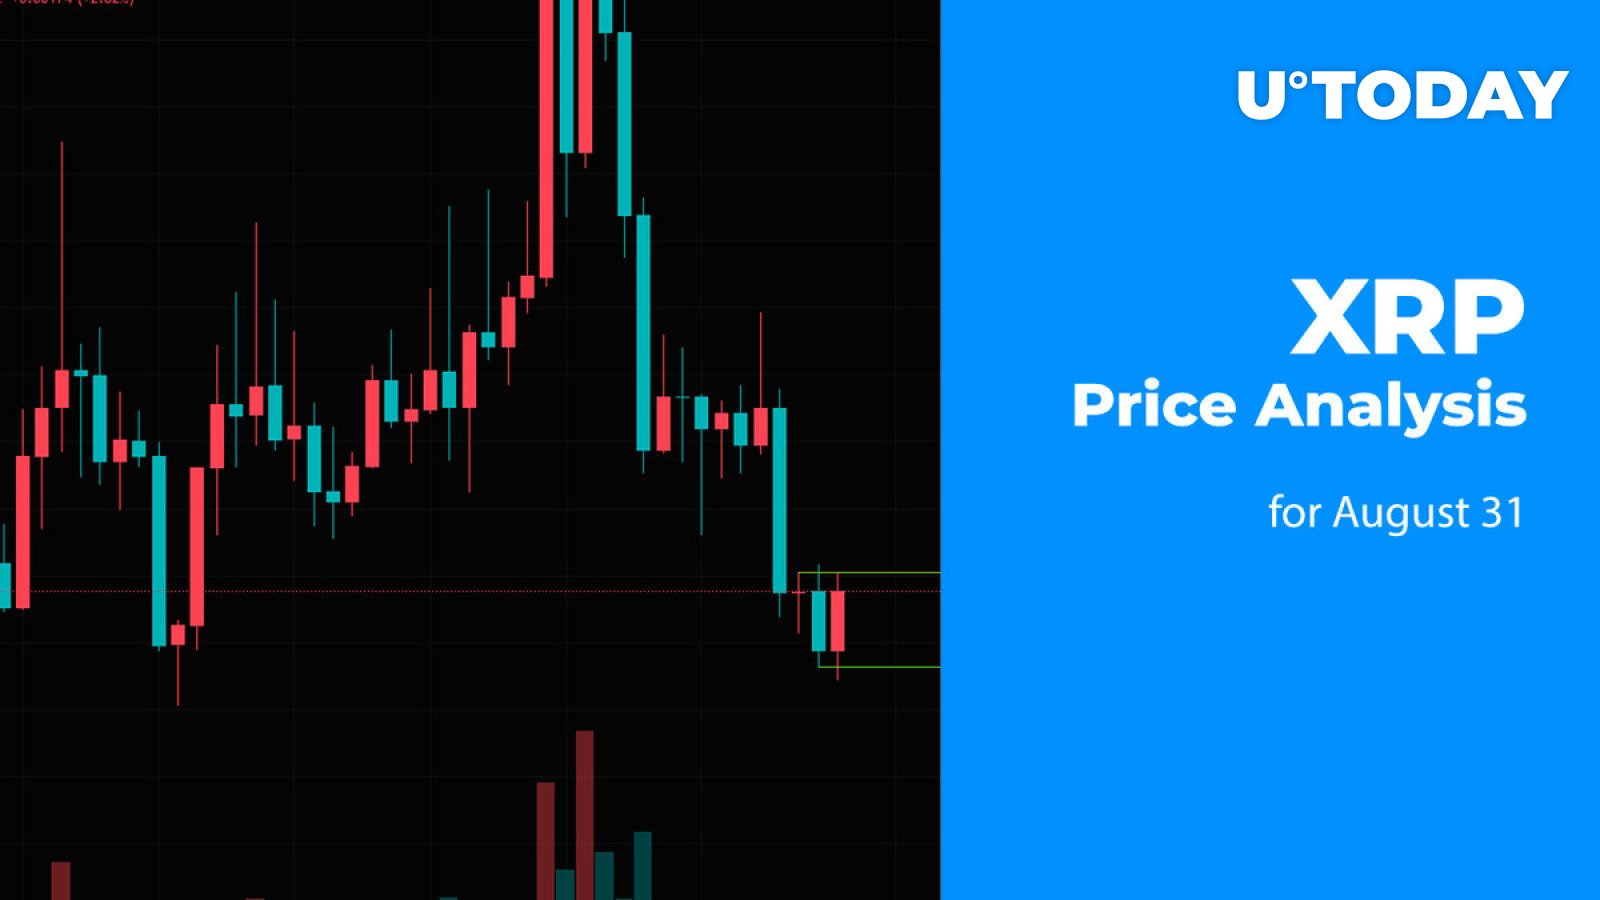 XRP Price Analysis for August 31